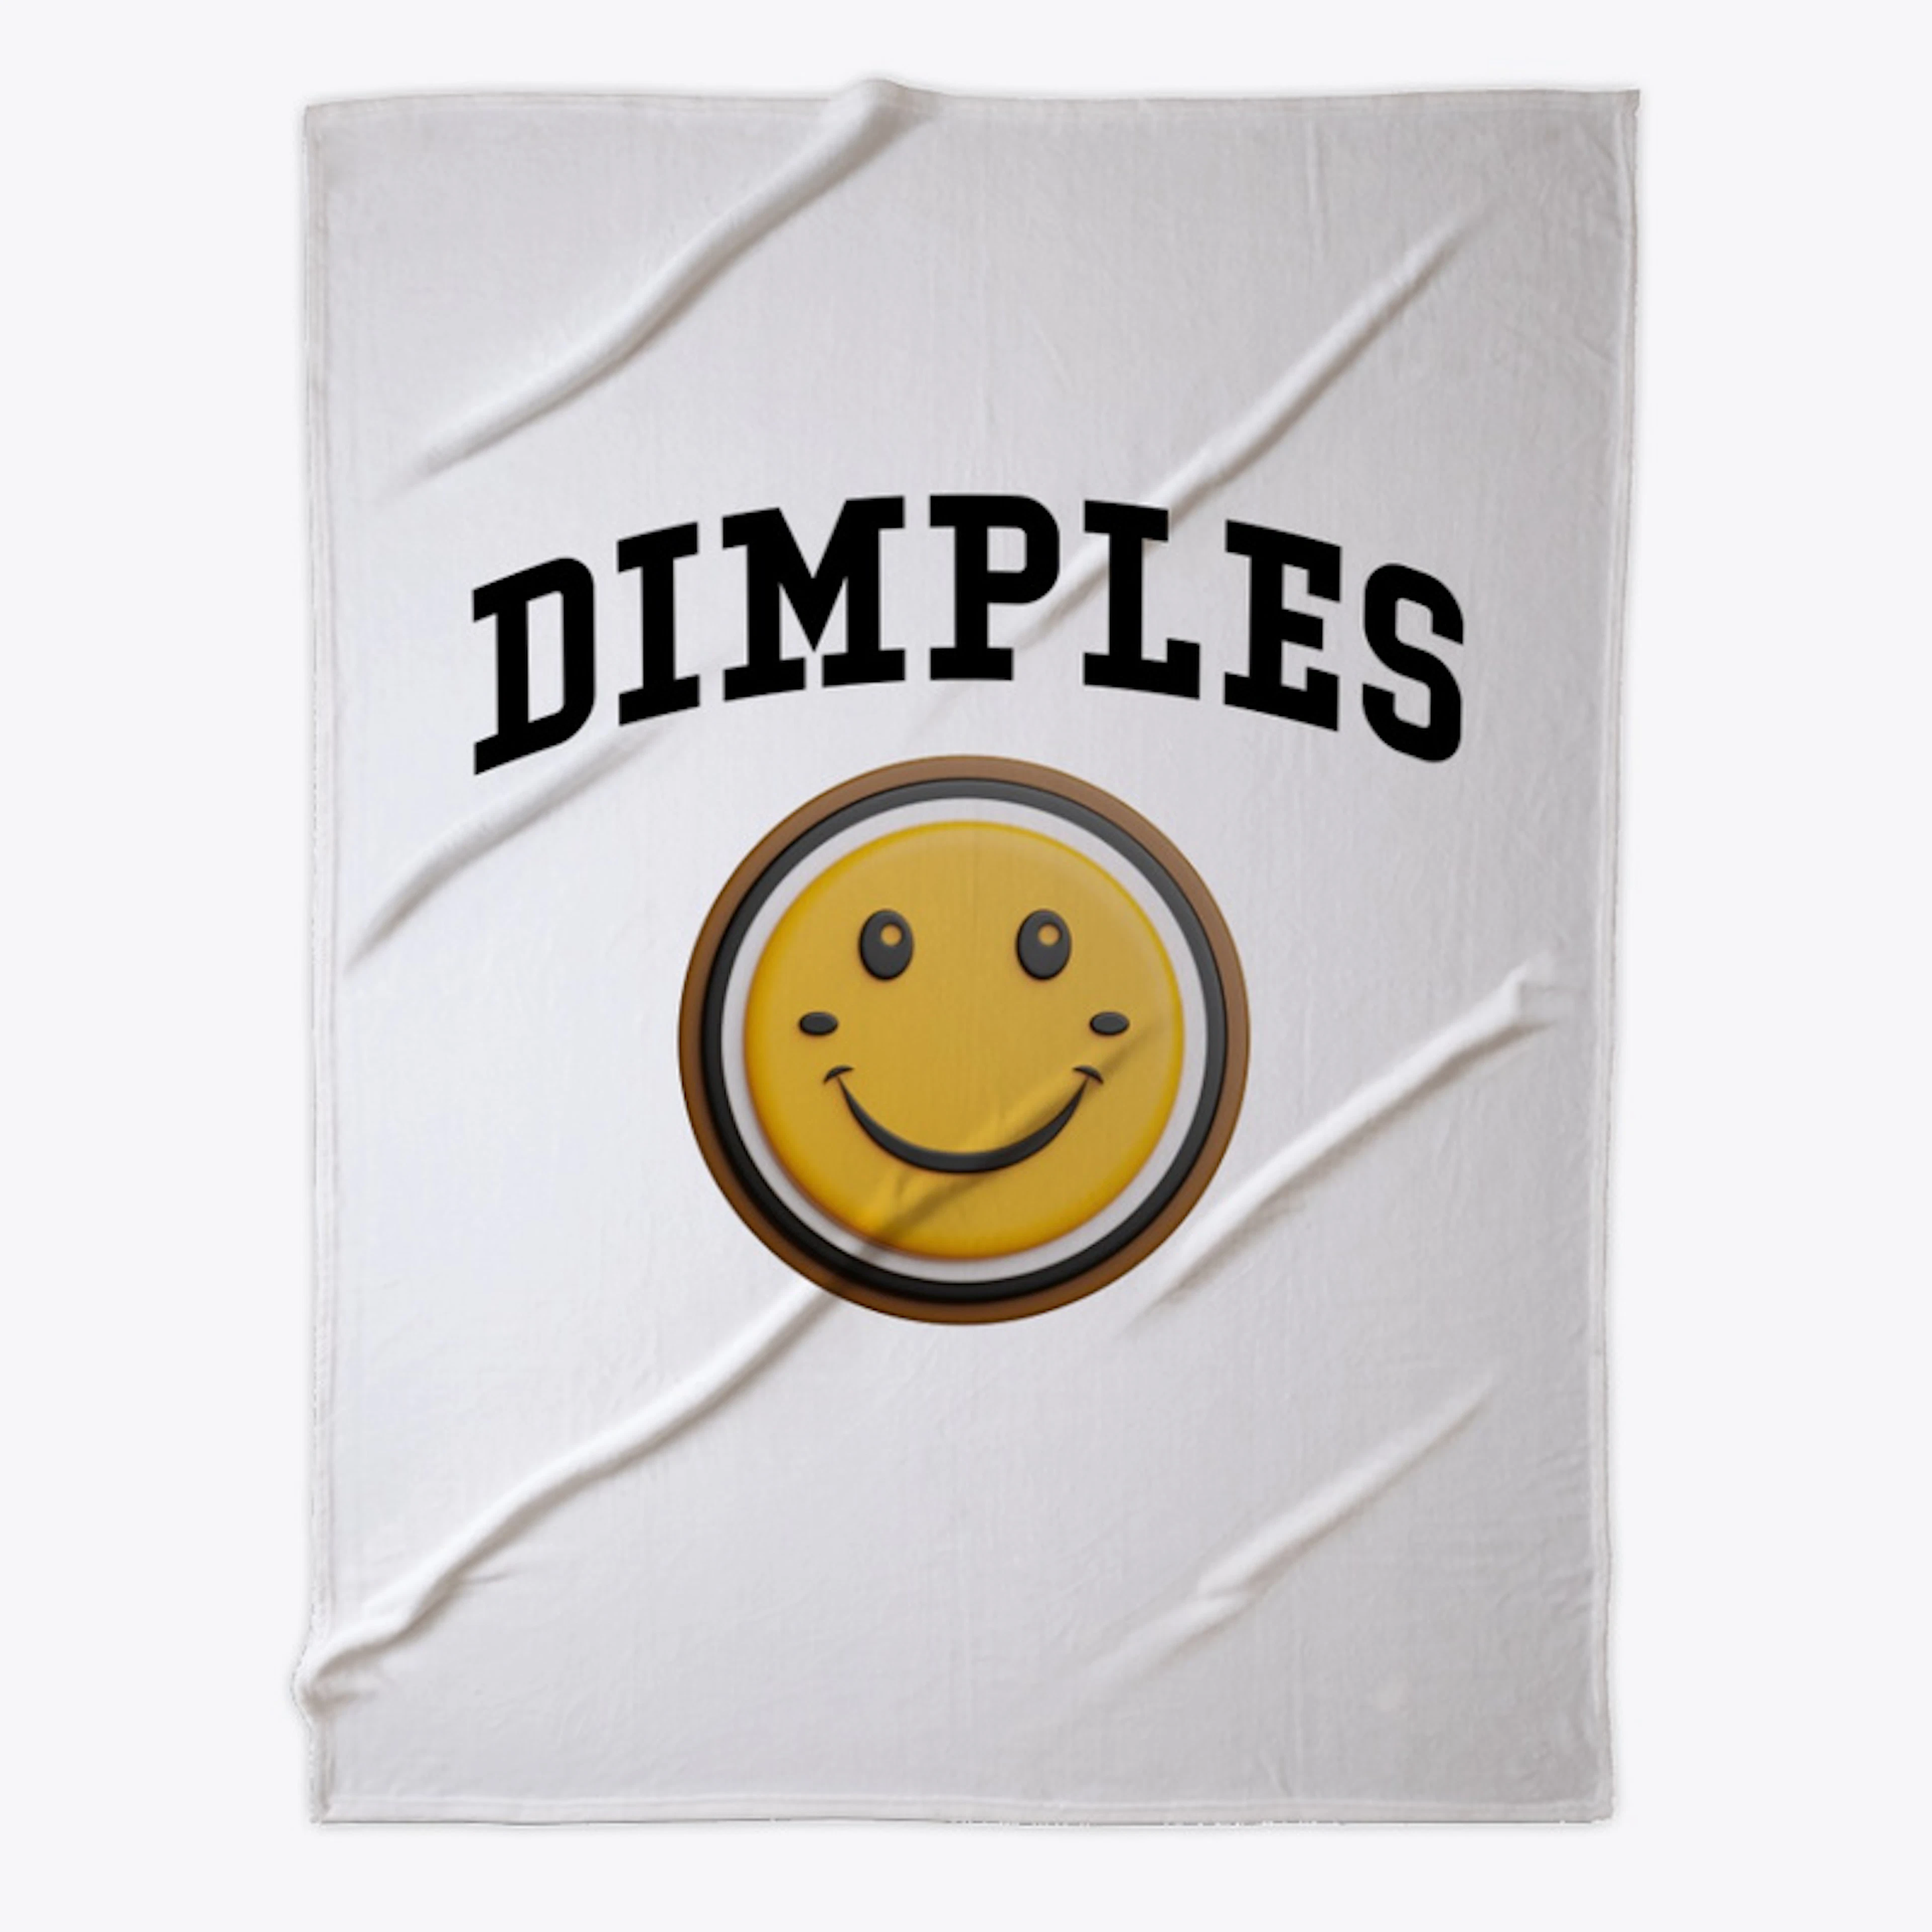 Dimples College